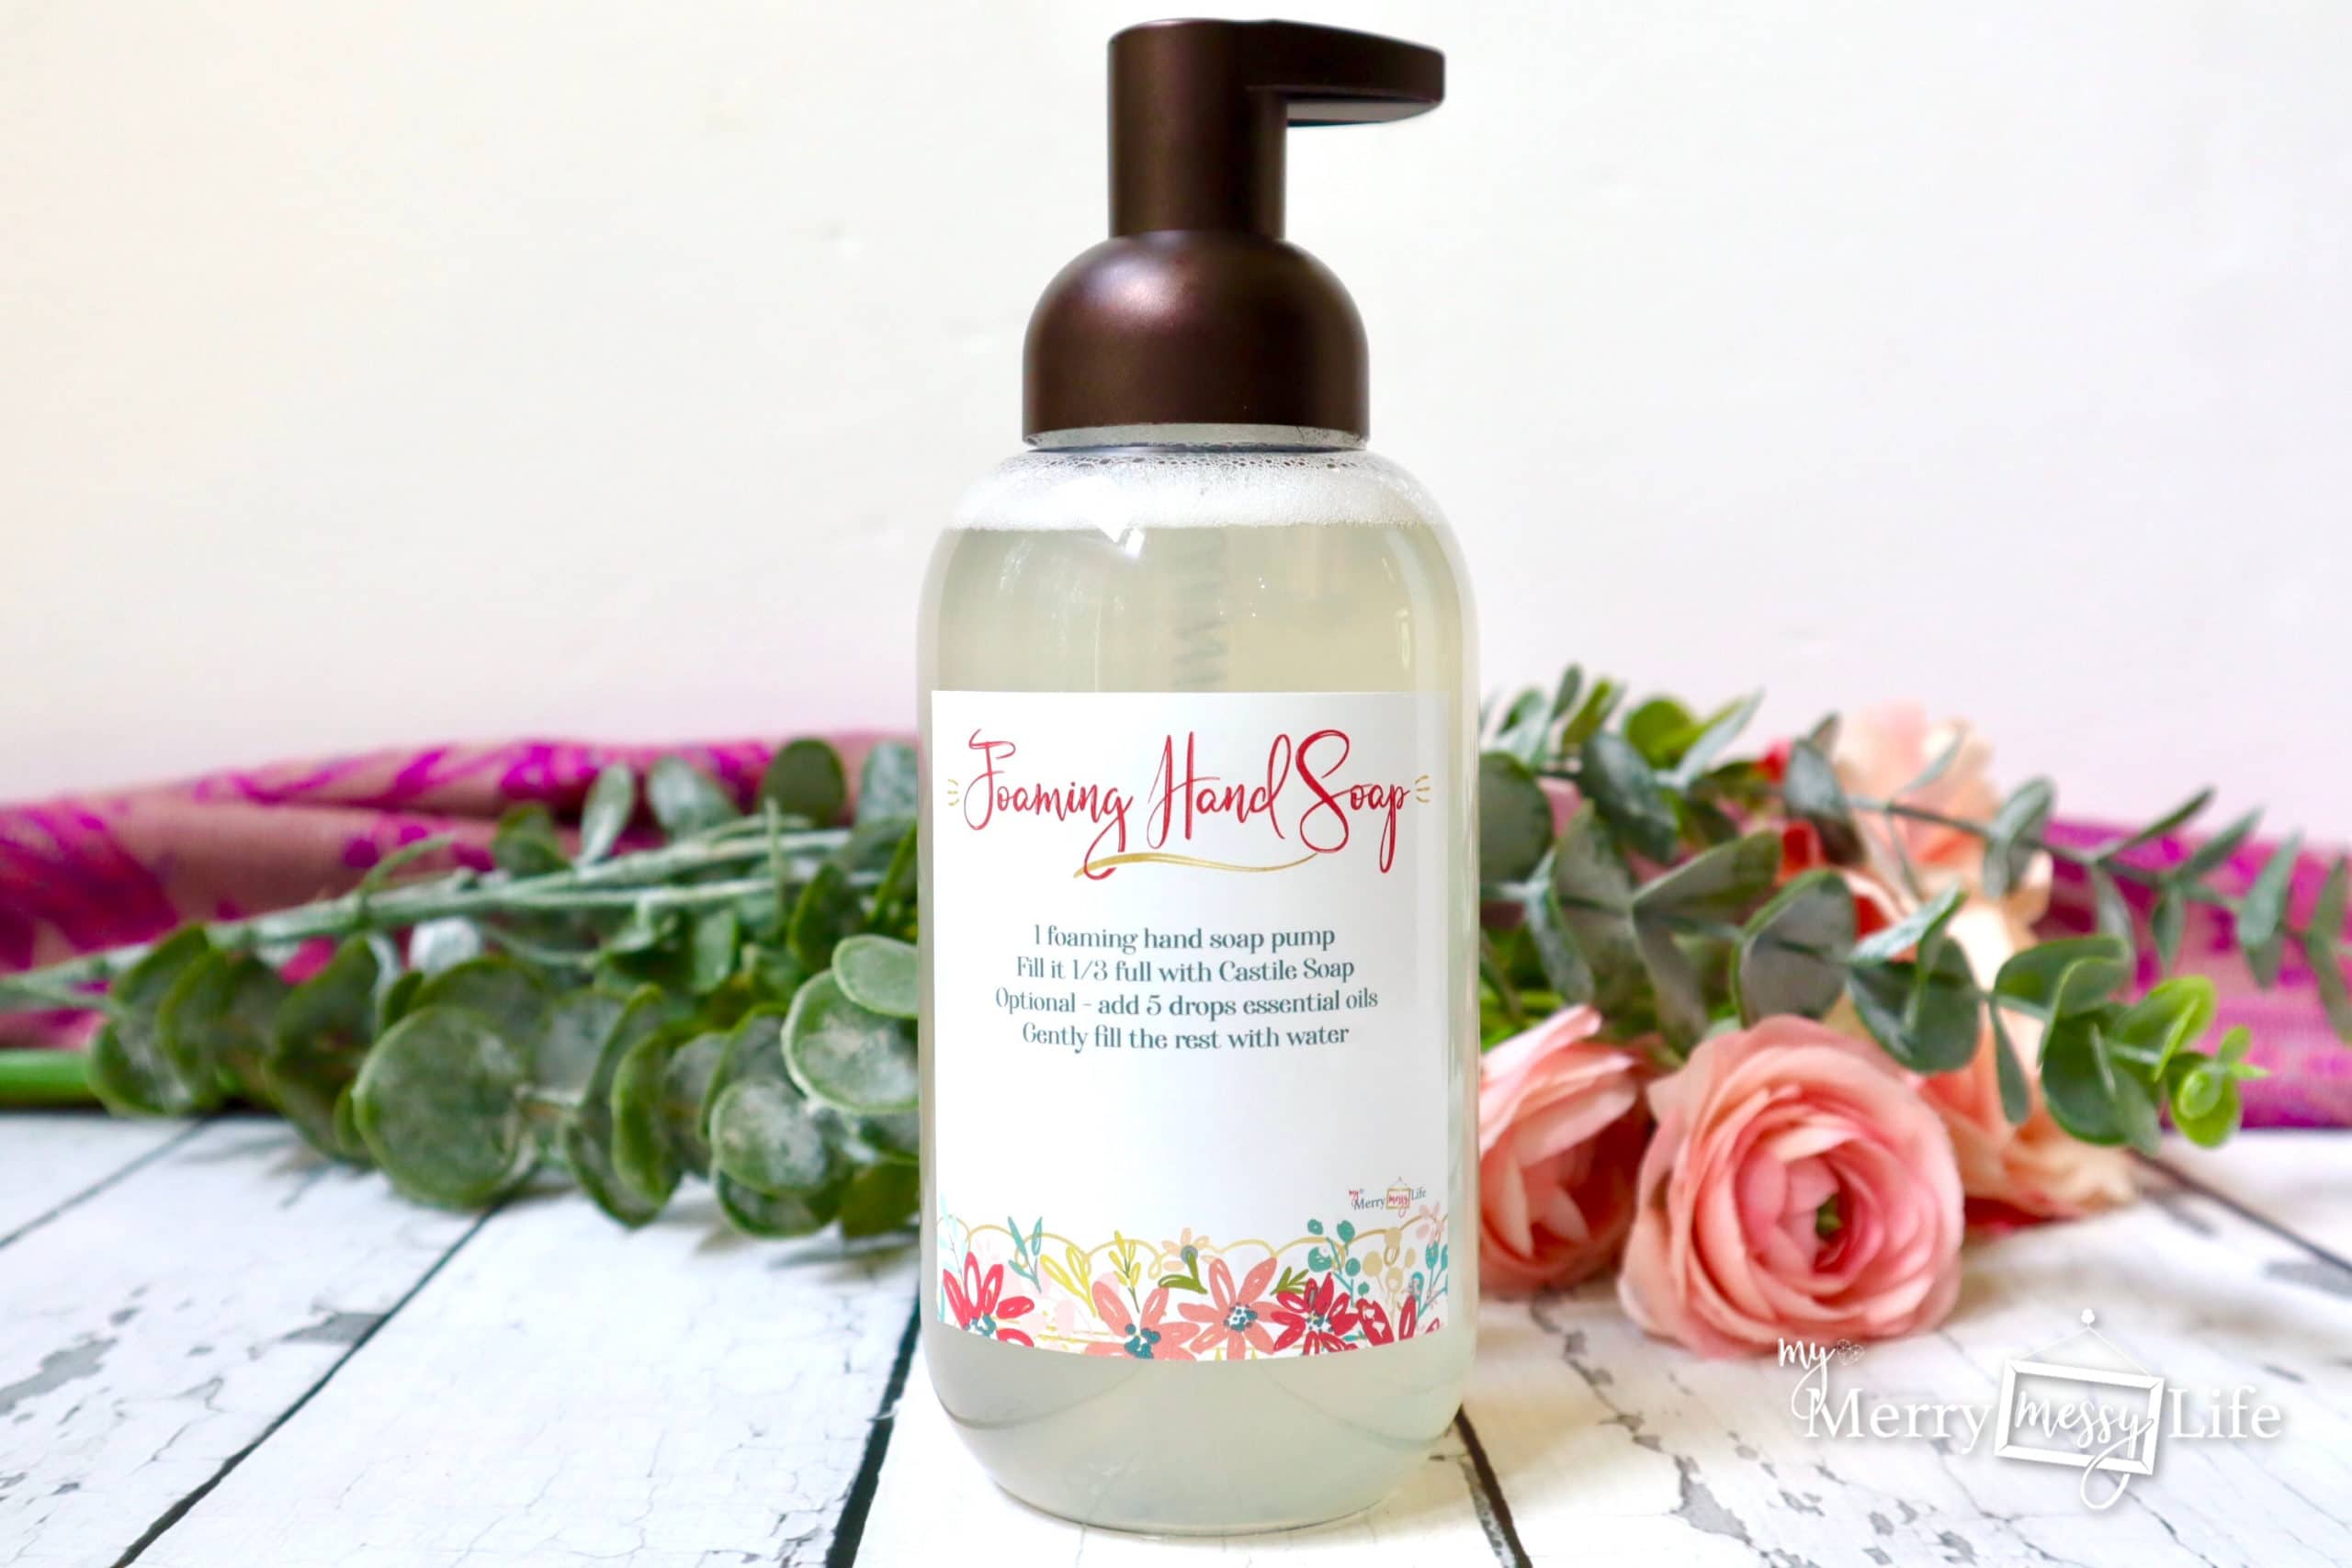 Foaming Hand Soap Recipe - All natural and moisturizing with vitamin E oil and essential oils